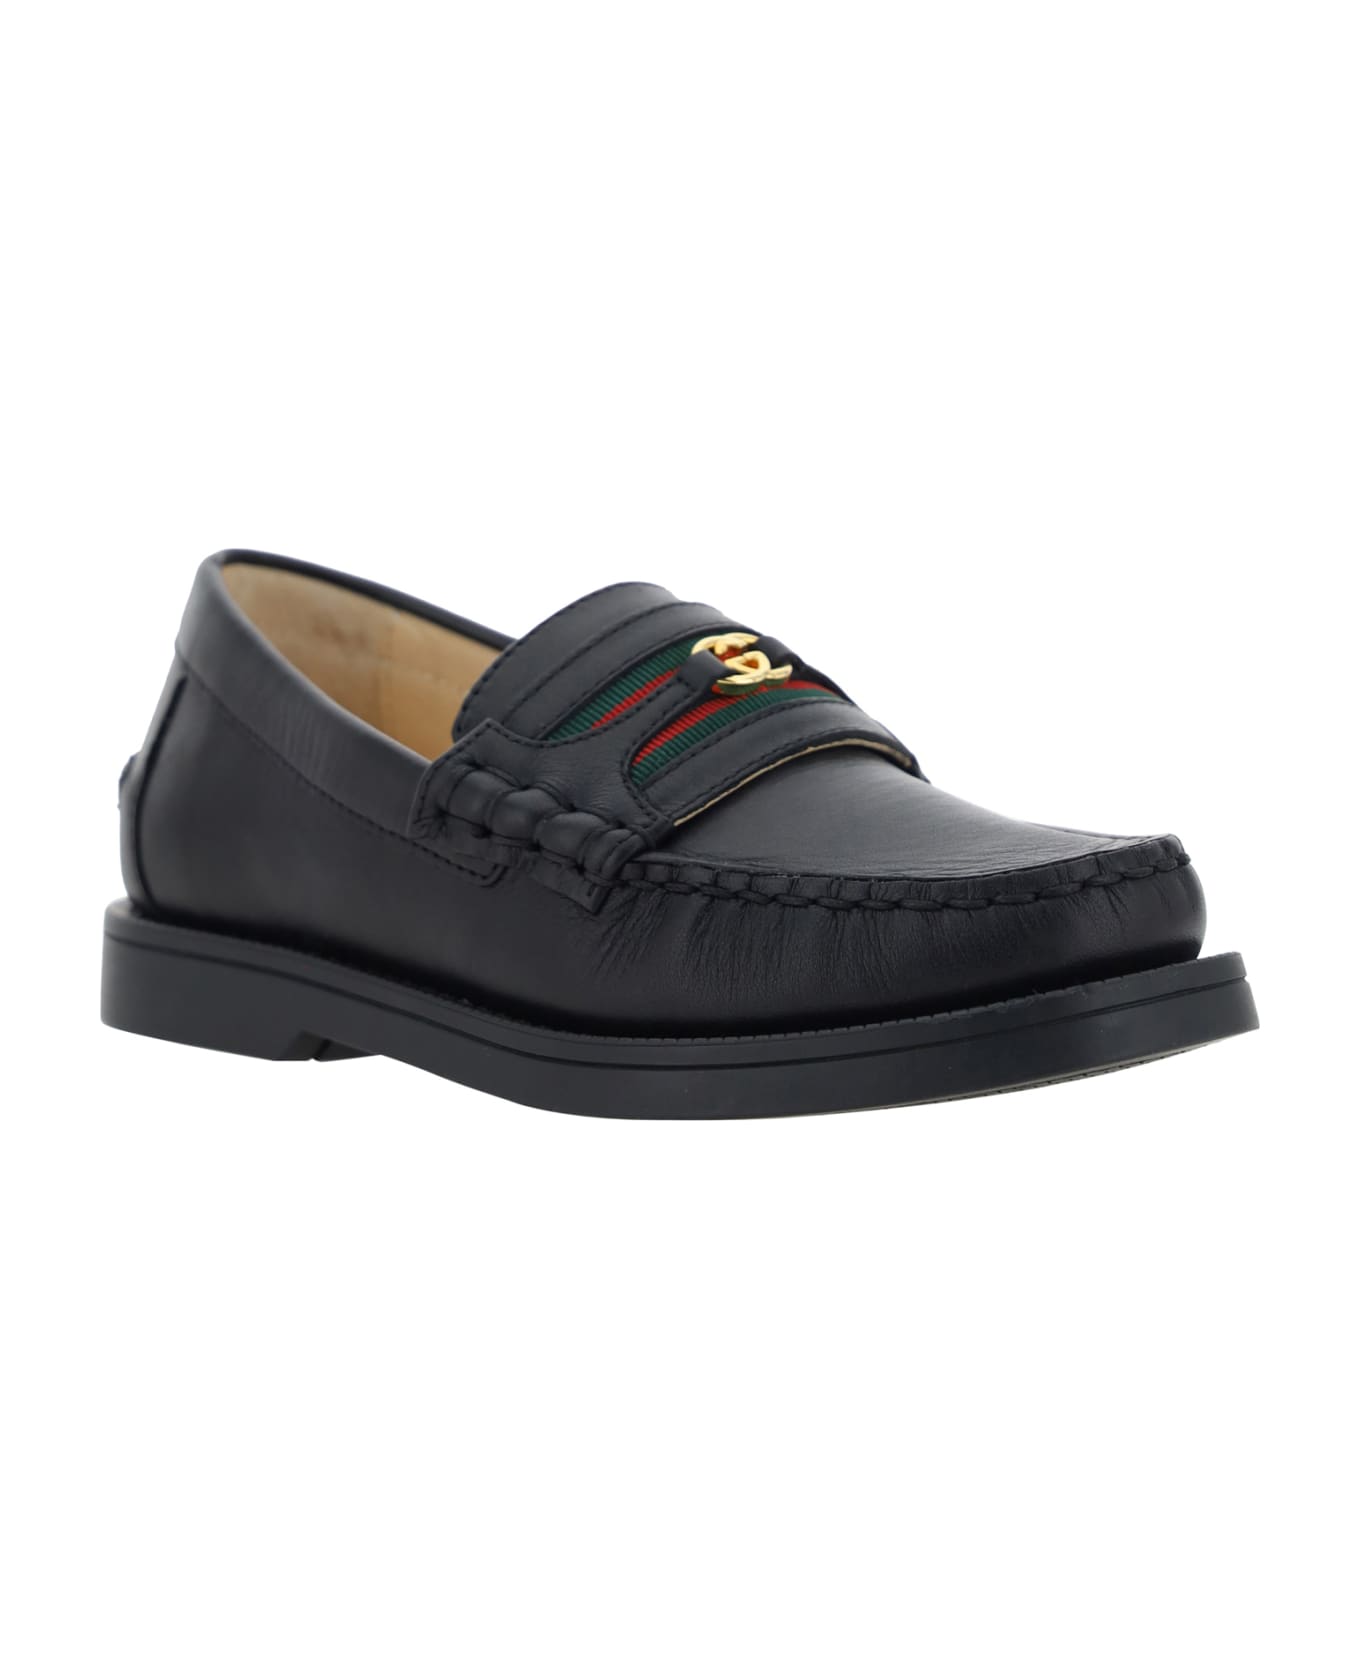 Gucci Loafers For Girl - Black シューズ